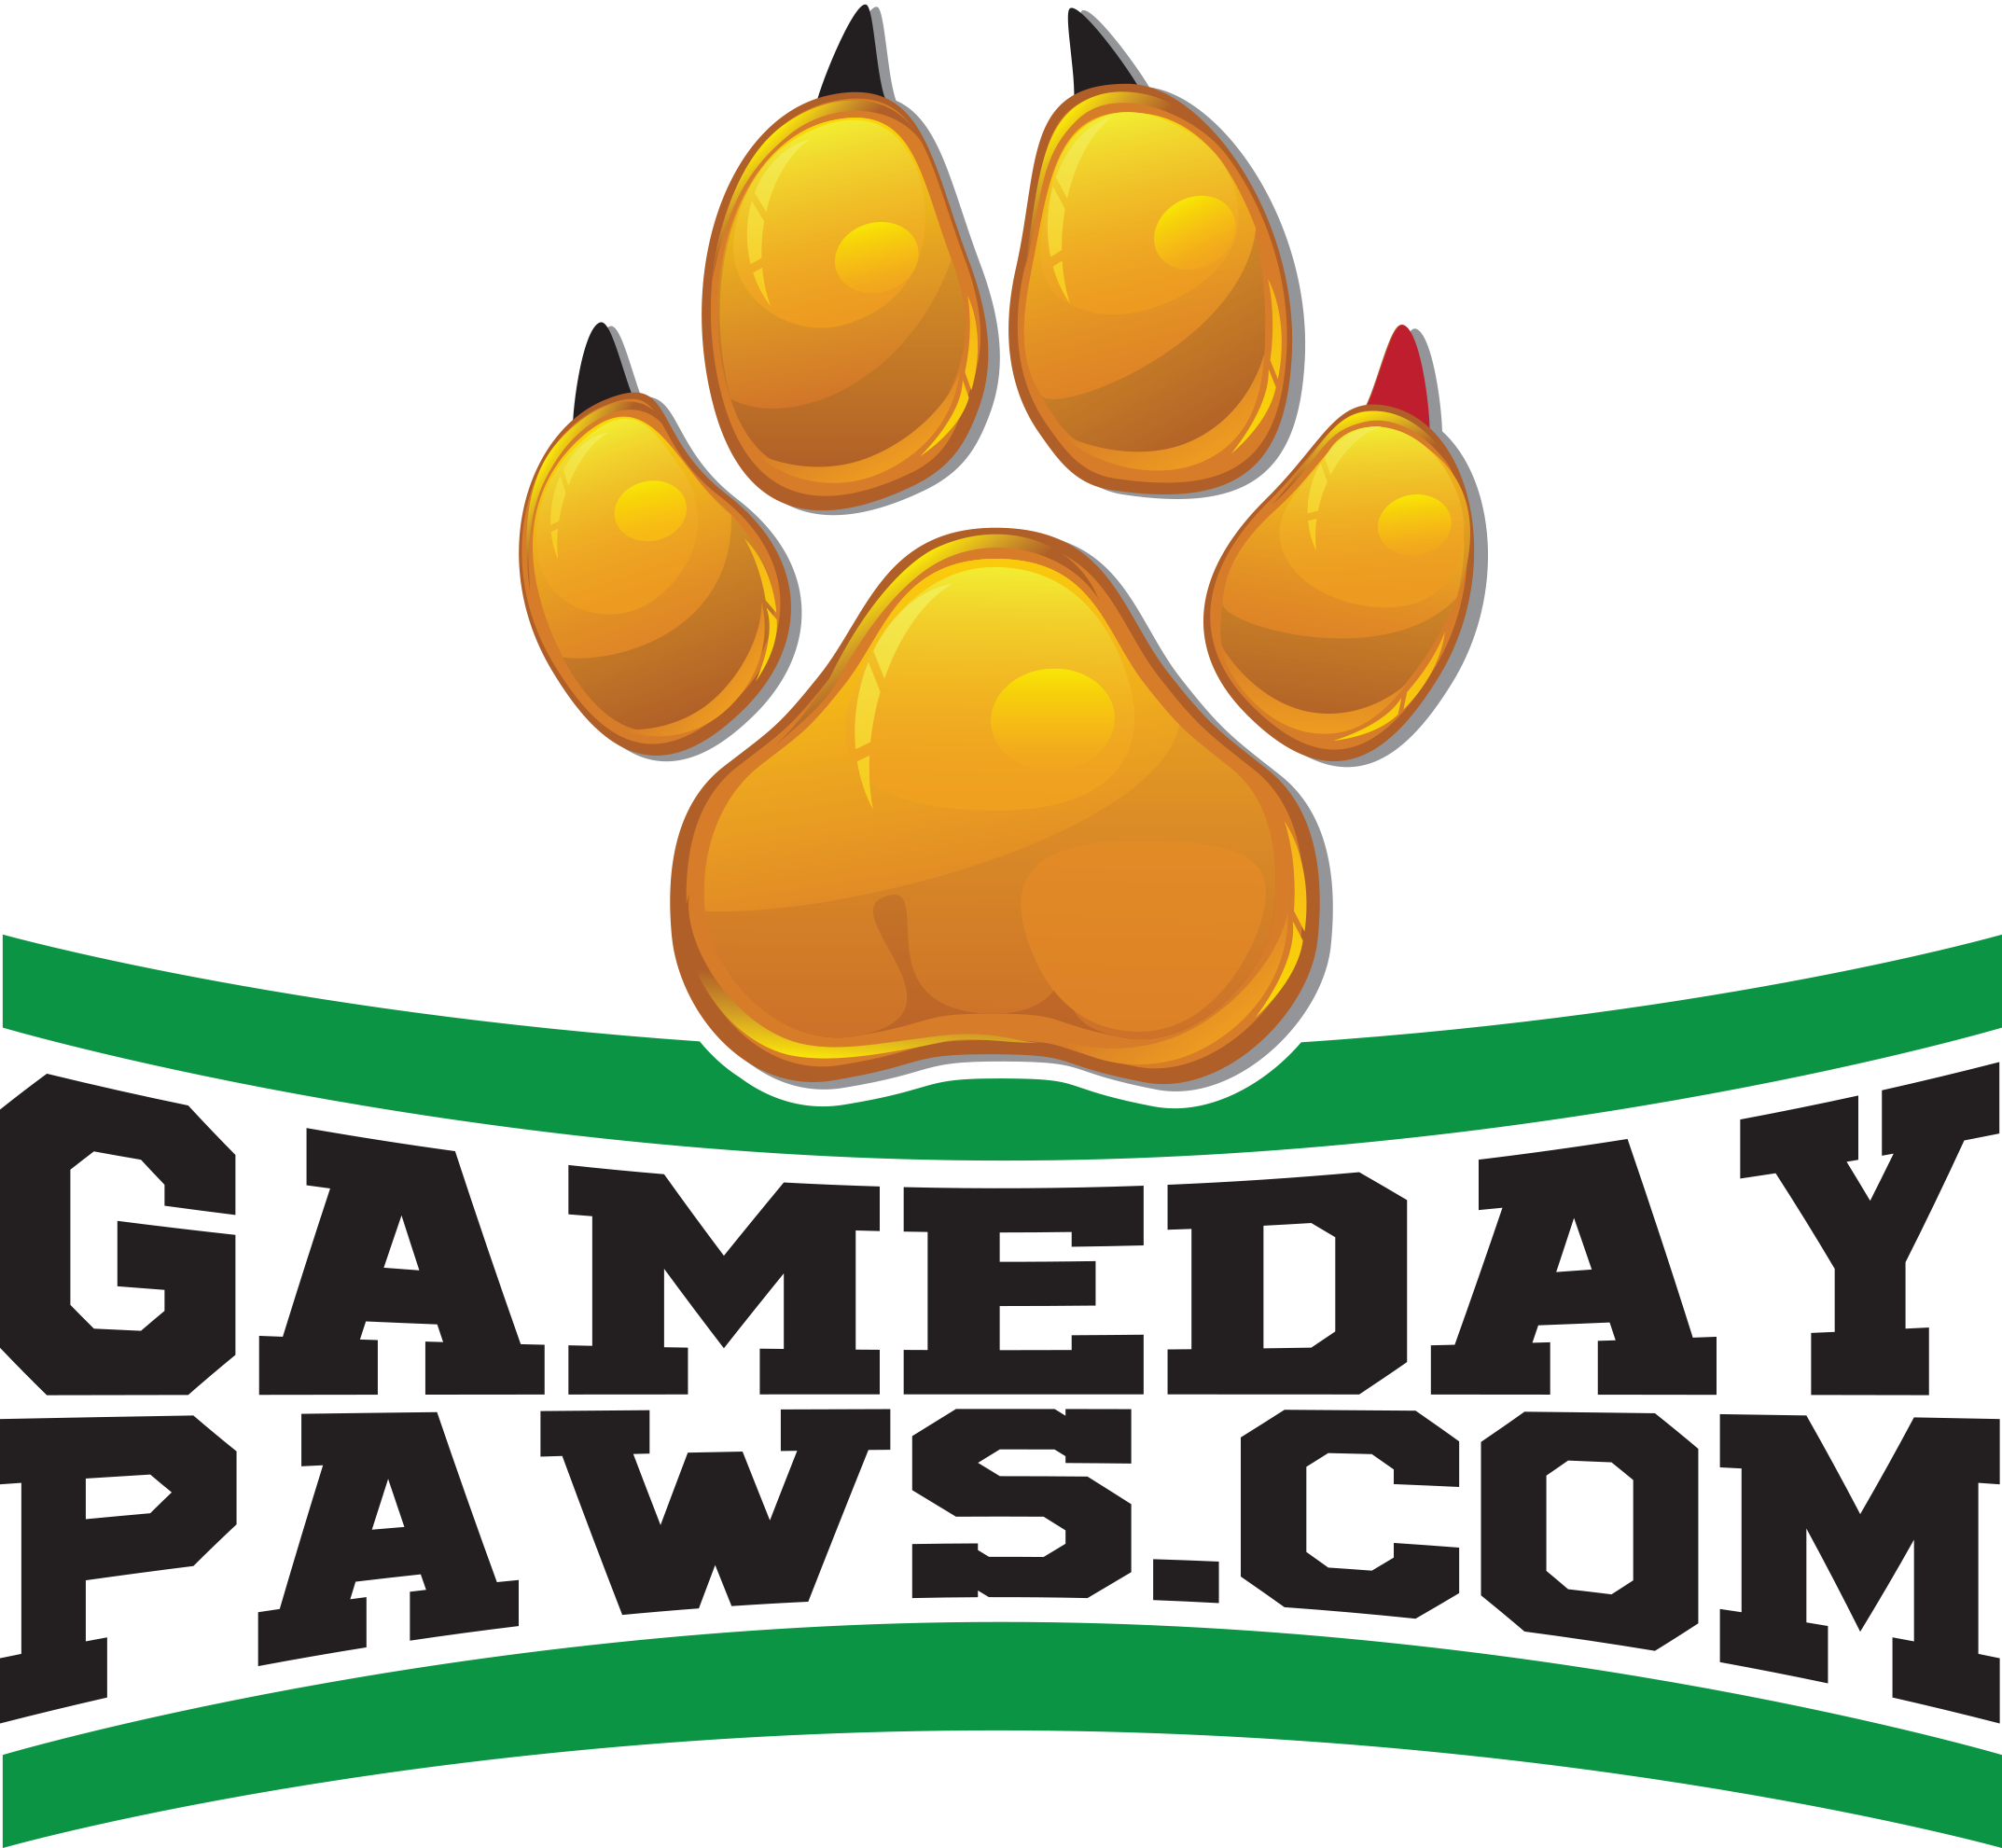 Game Day Paws Dog Jerseys And Dog Sports Apparel - Poster (2146x1981)